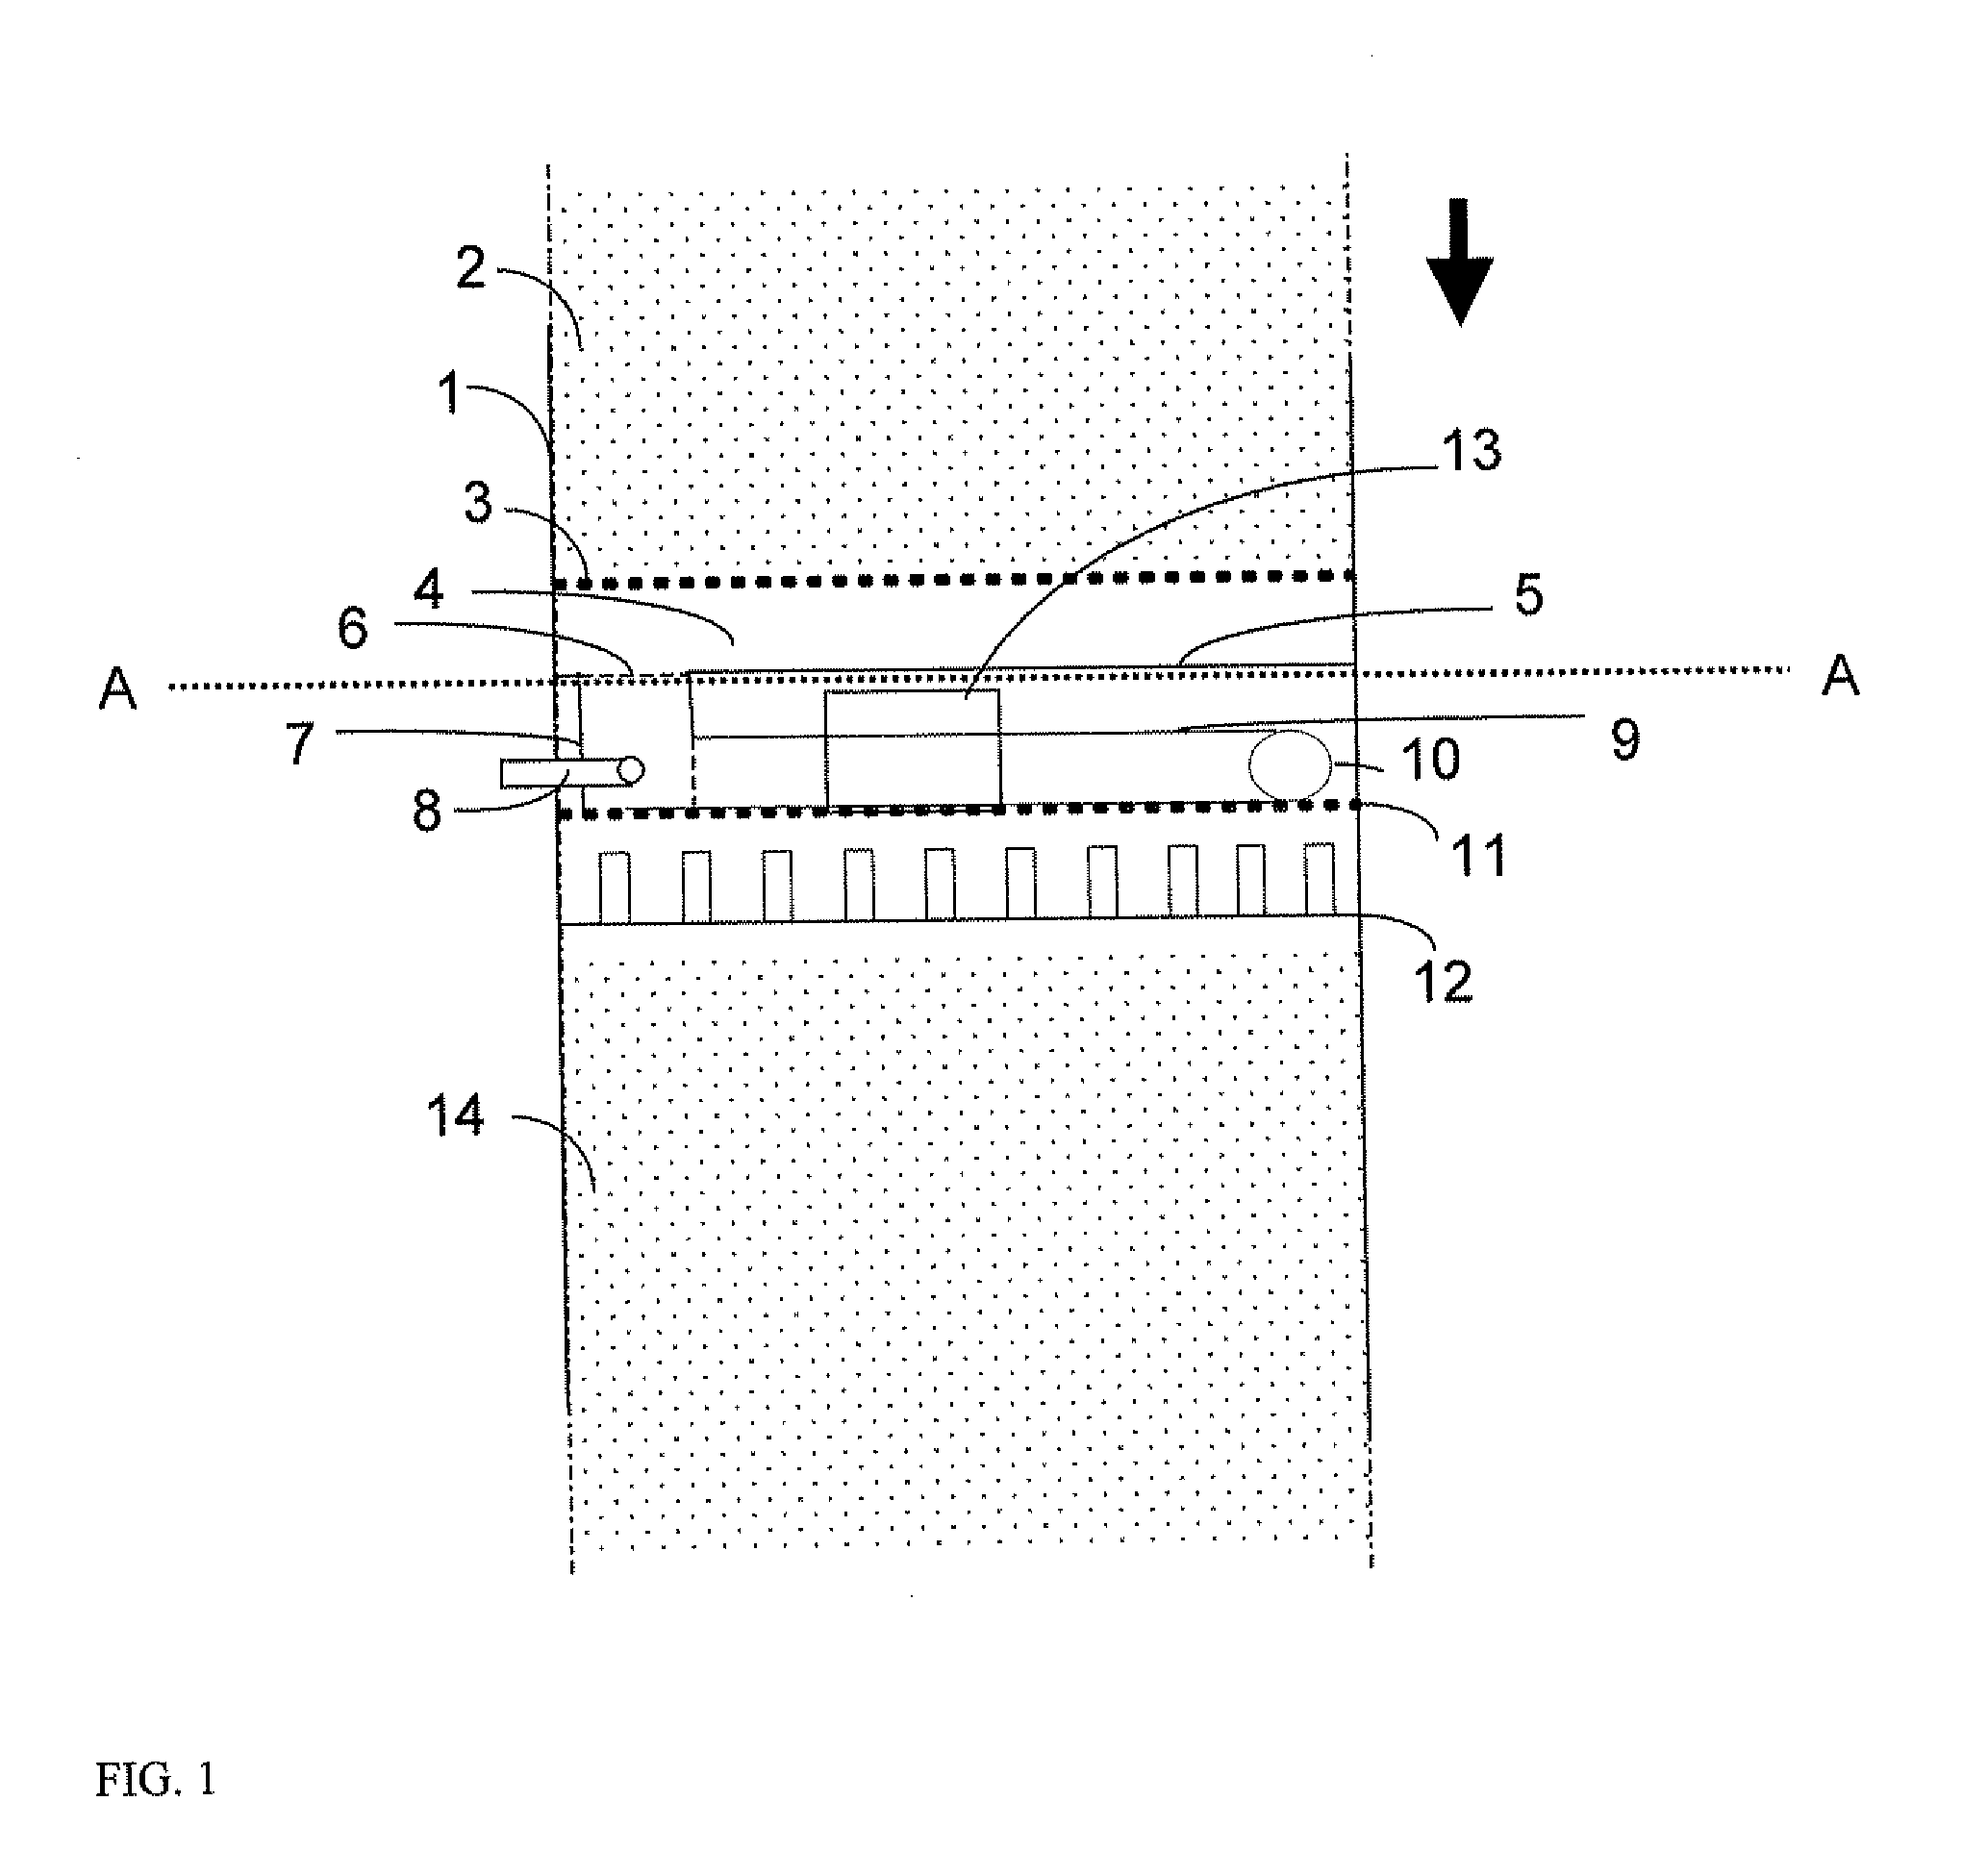 Compact device for mixing fluids in a downflow reactor